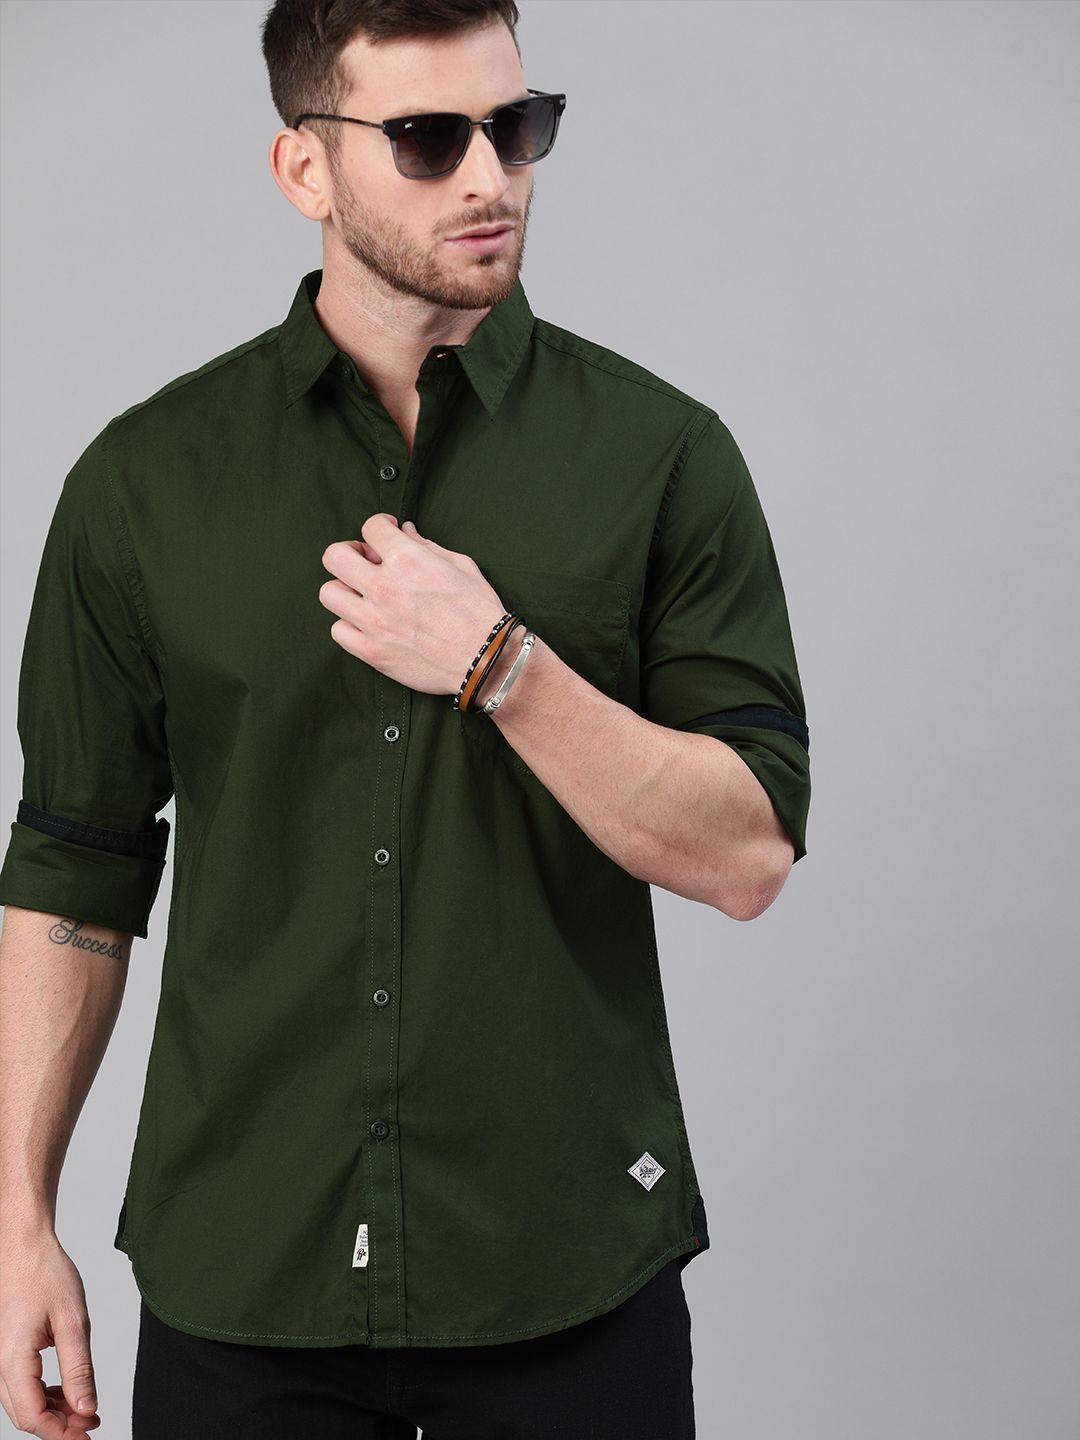 roadster-men-olive-green-pure-cotton-sustainable-casual-shirt